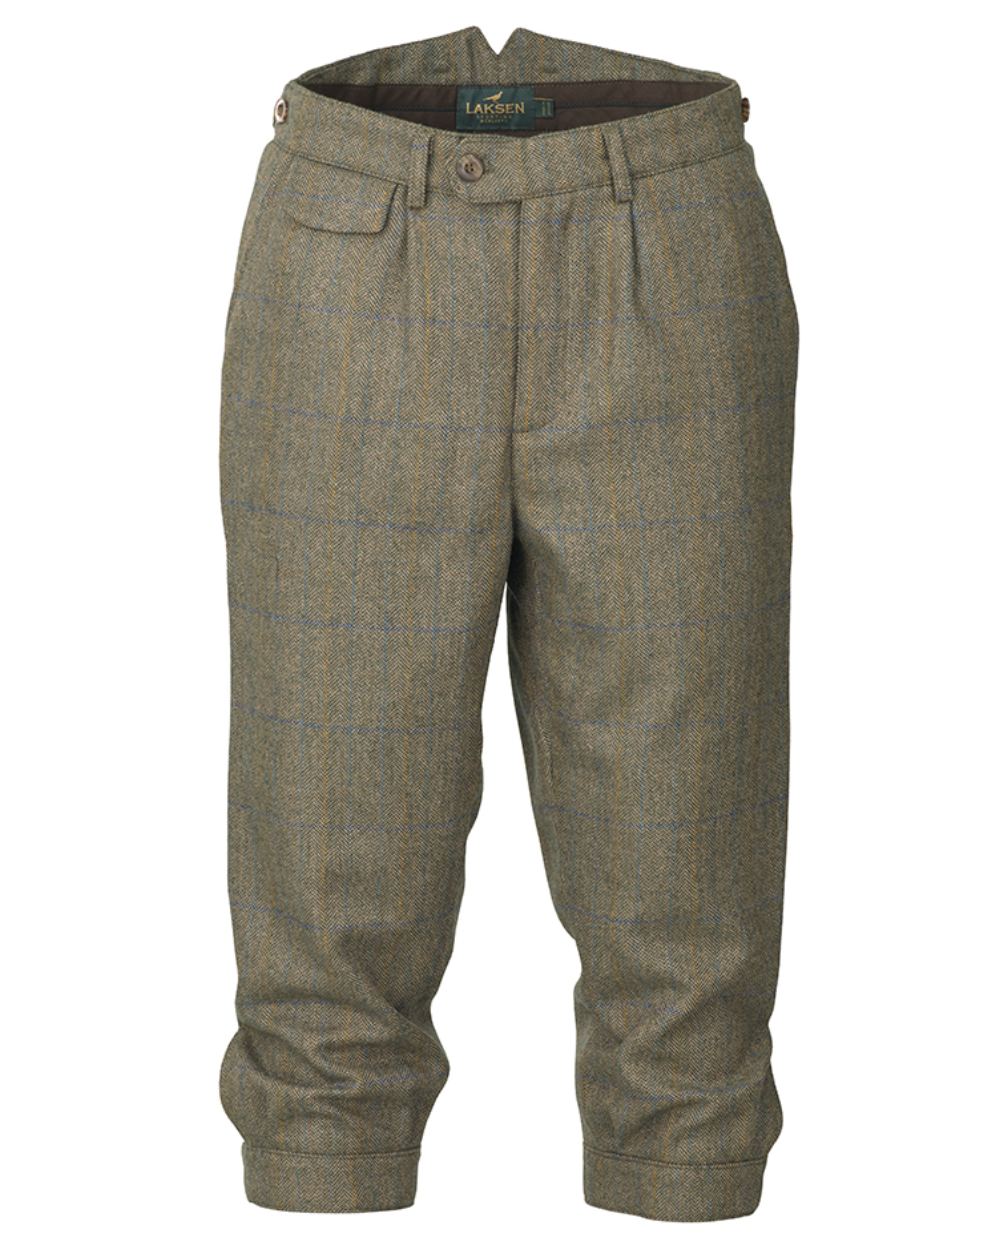 Laksen Laird Tweed Breeks With CTX On A White Background